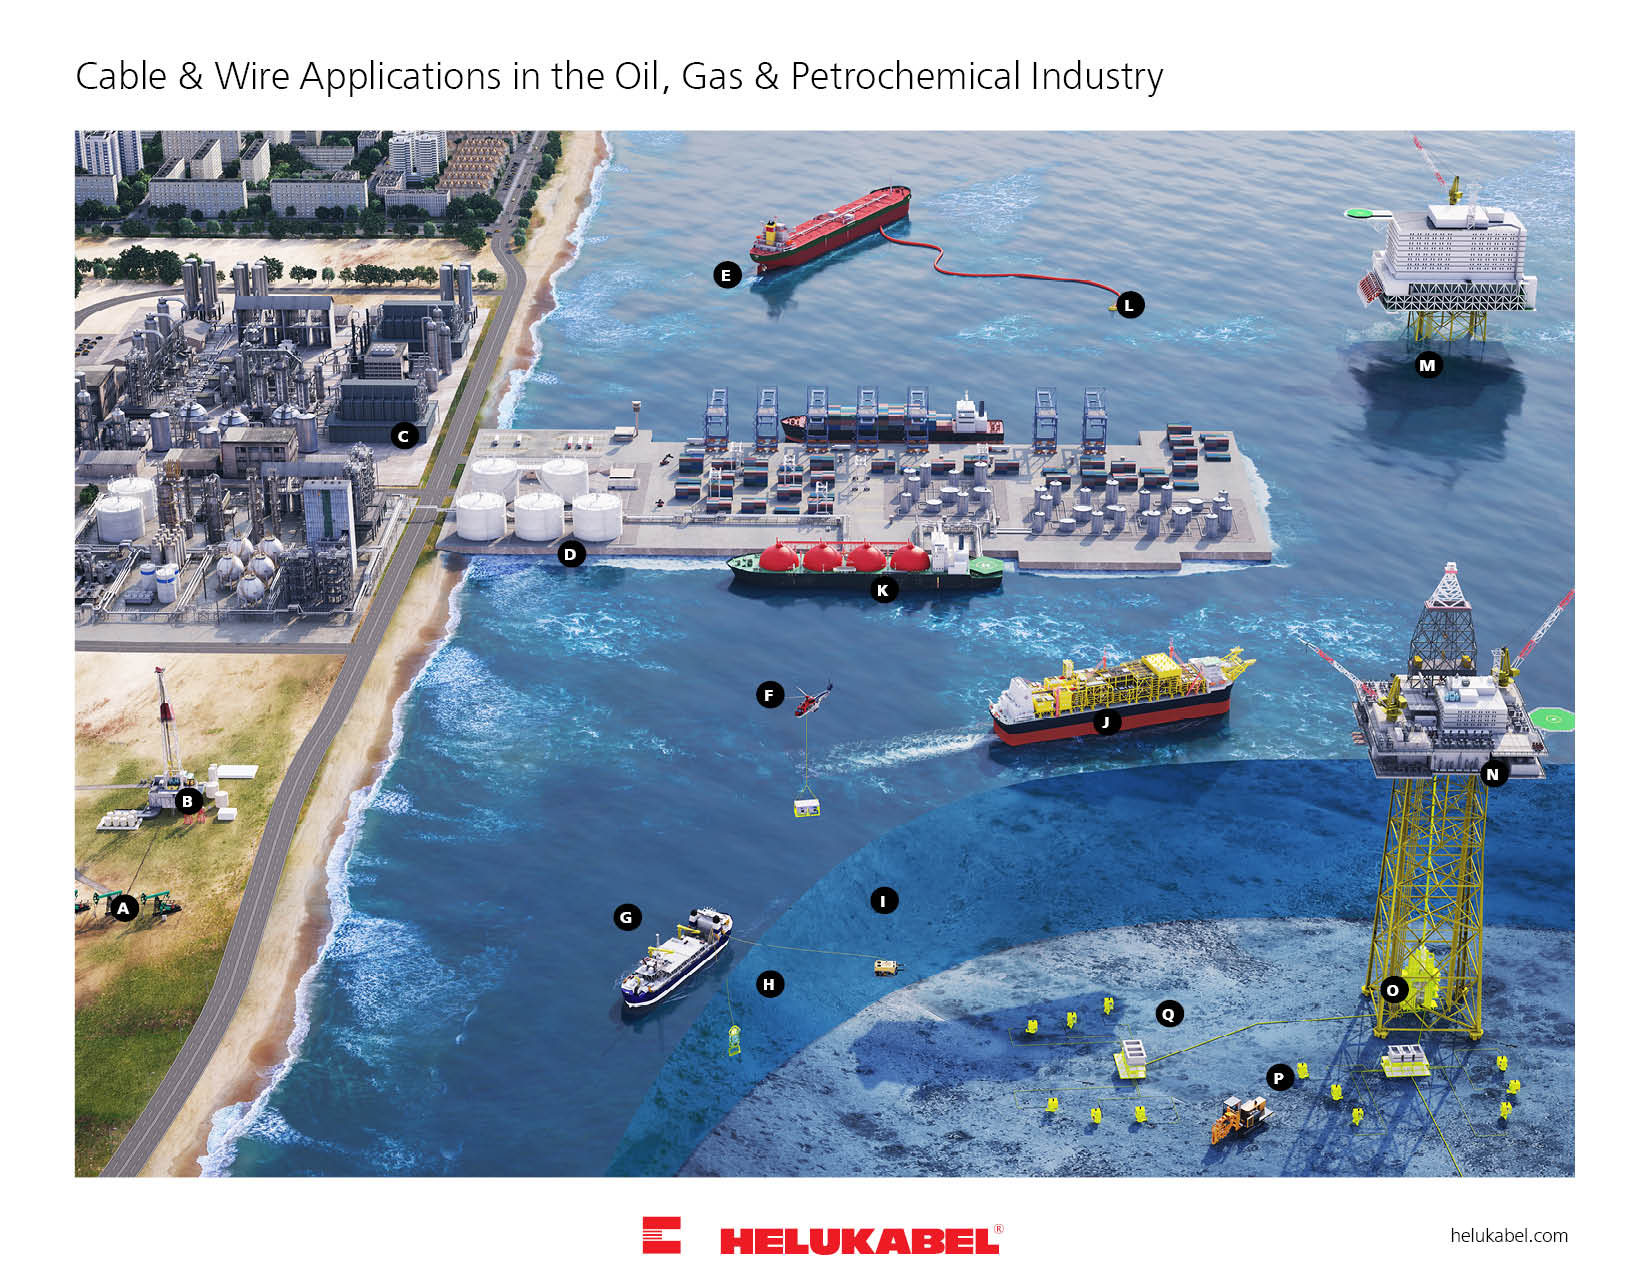 Cables & Wires in the Oil, Gas & Petrochemical Industry